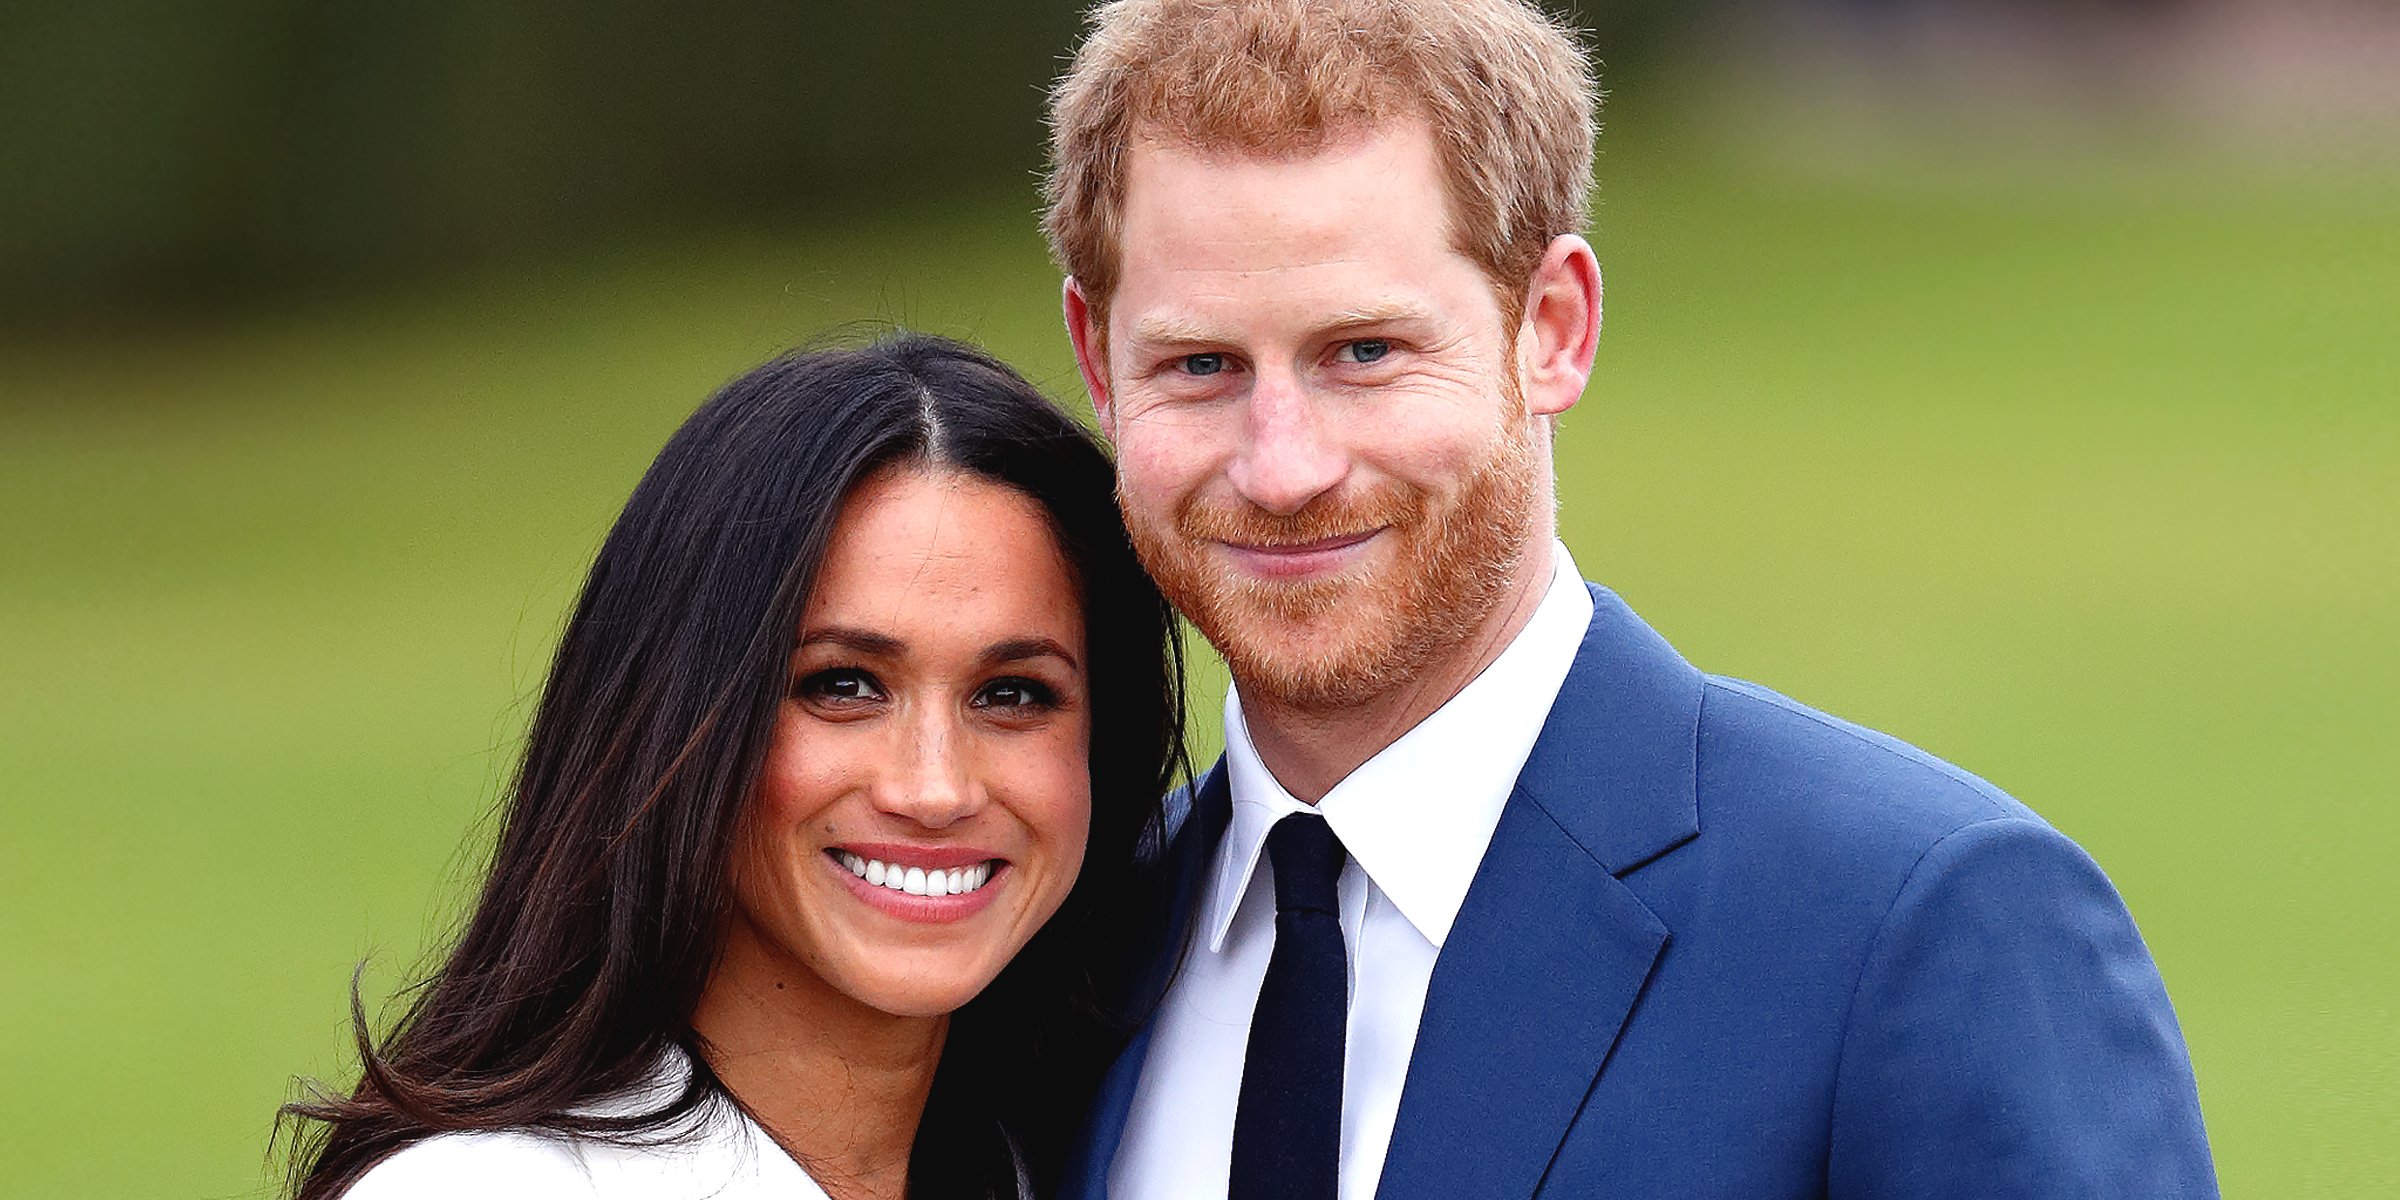 Meghan Markle and Prince Harry┃Source: Getty Images